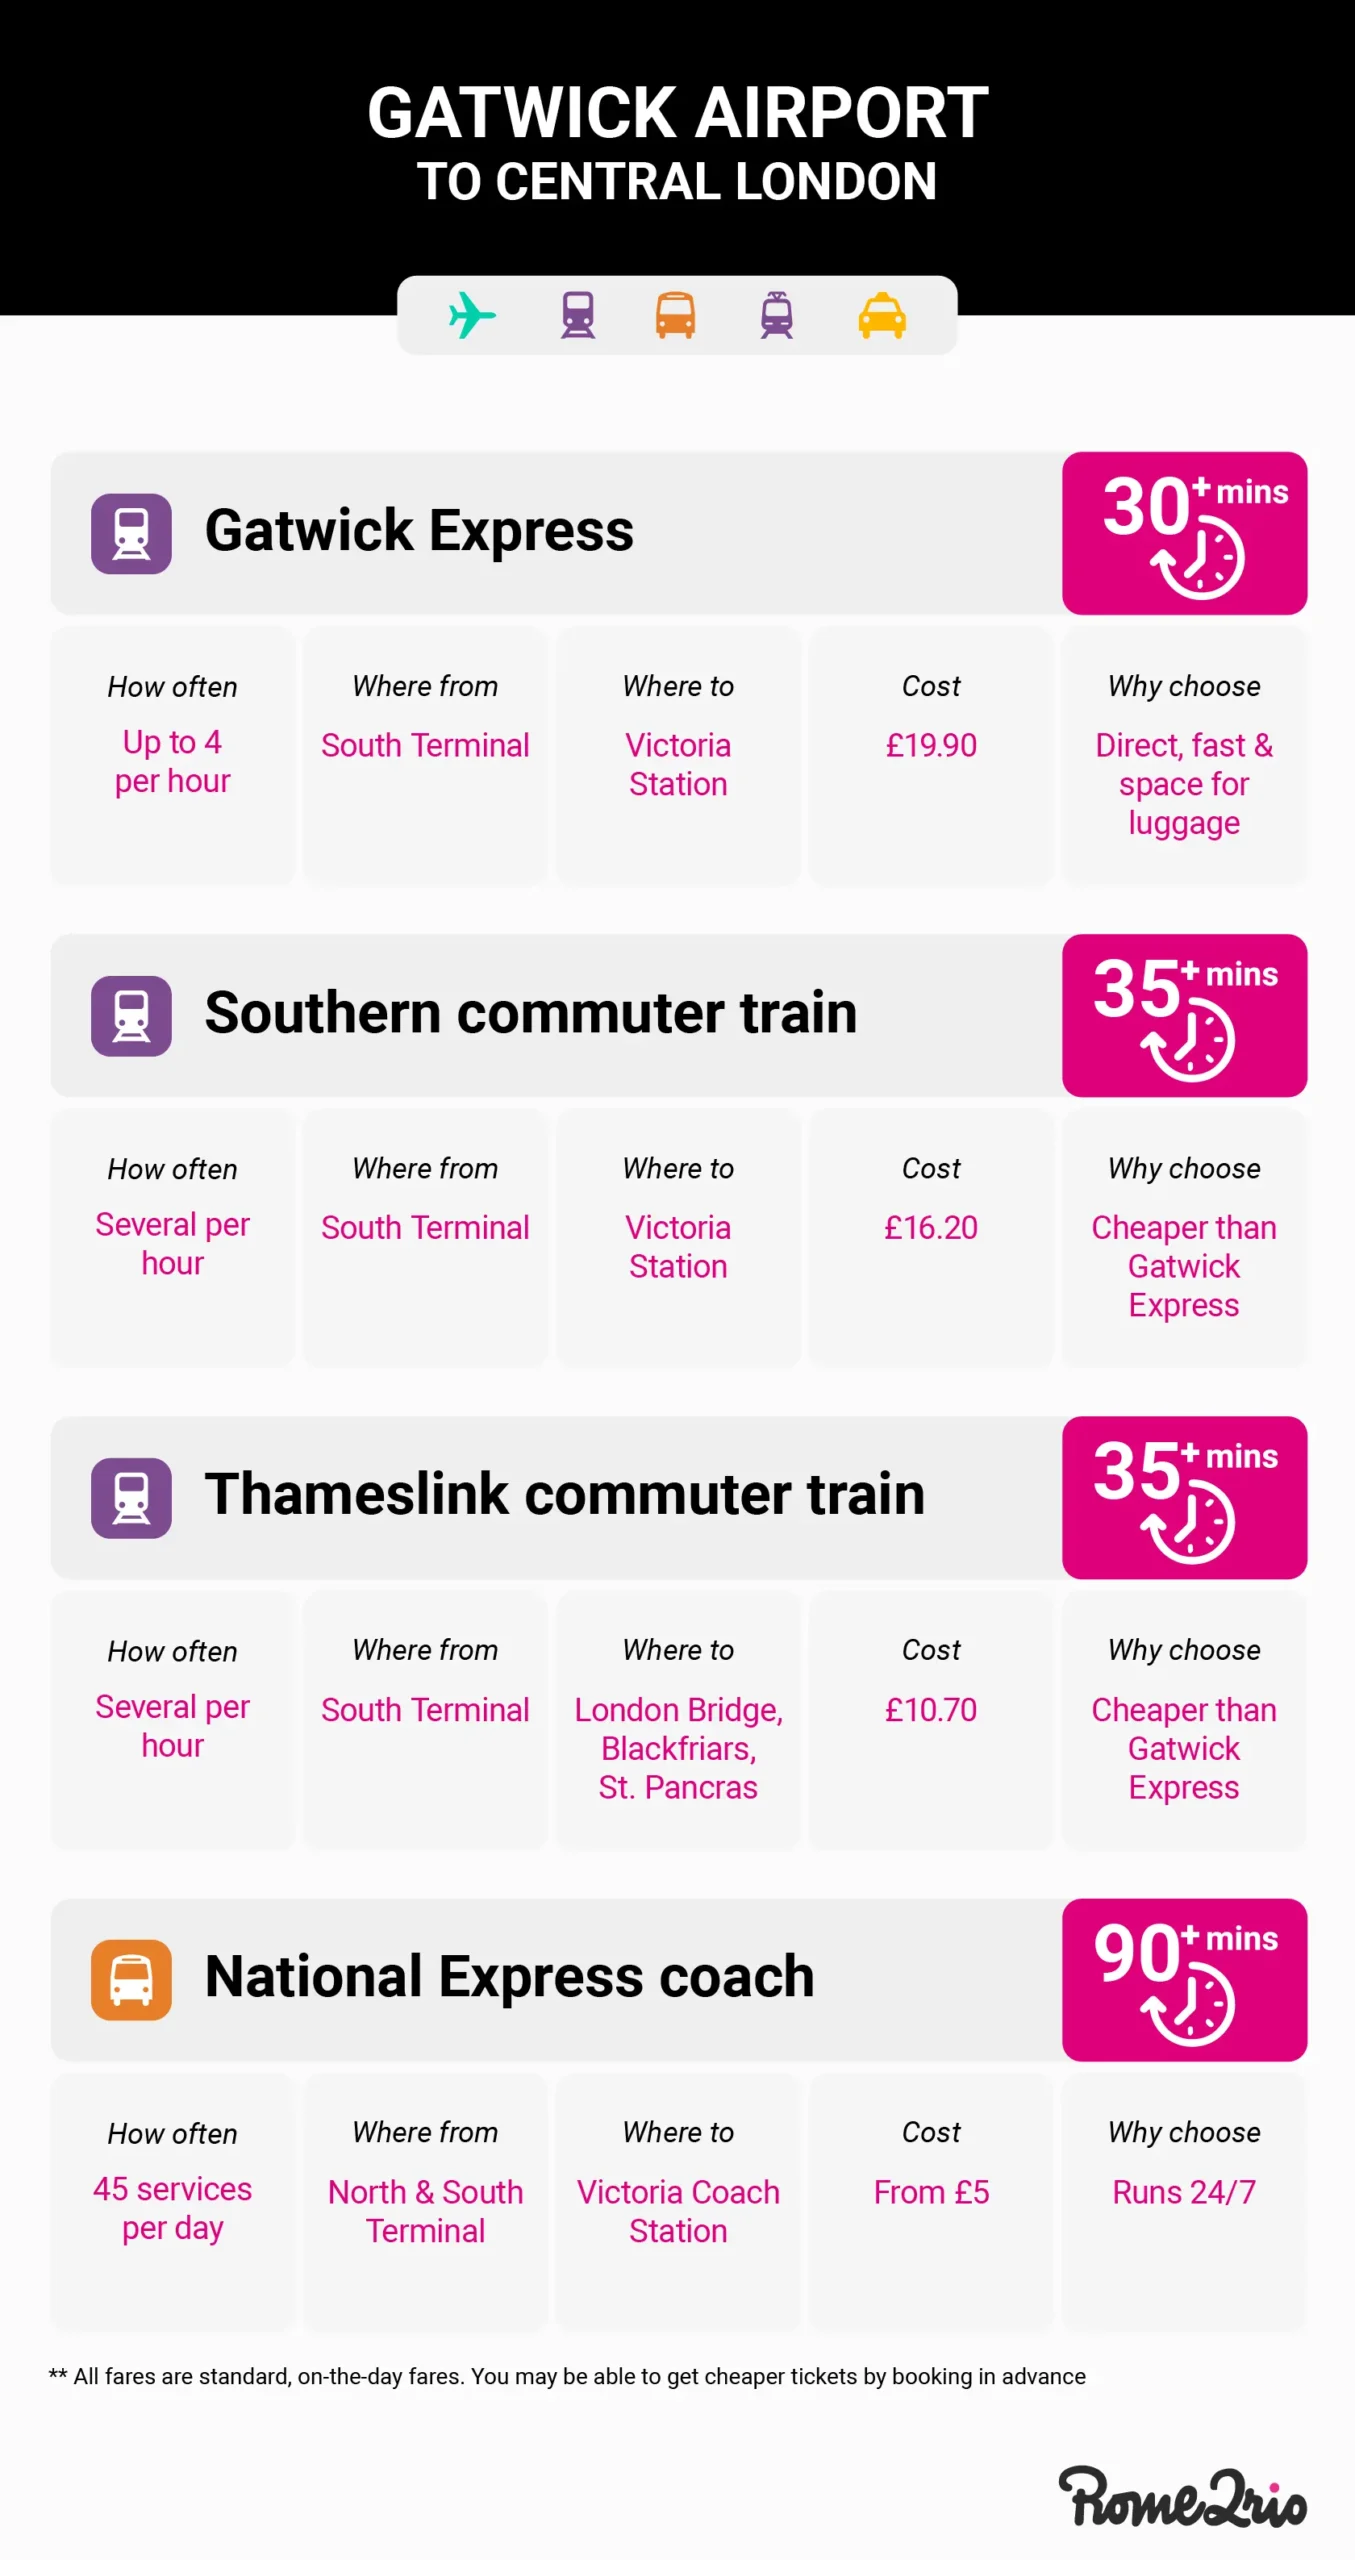 How much is Gatwick Express to central London?